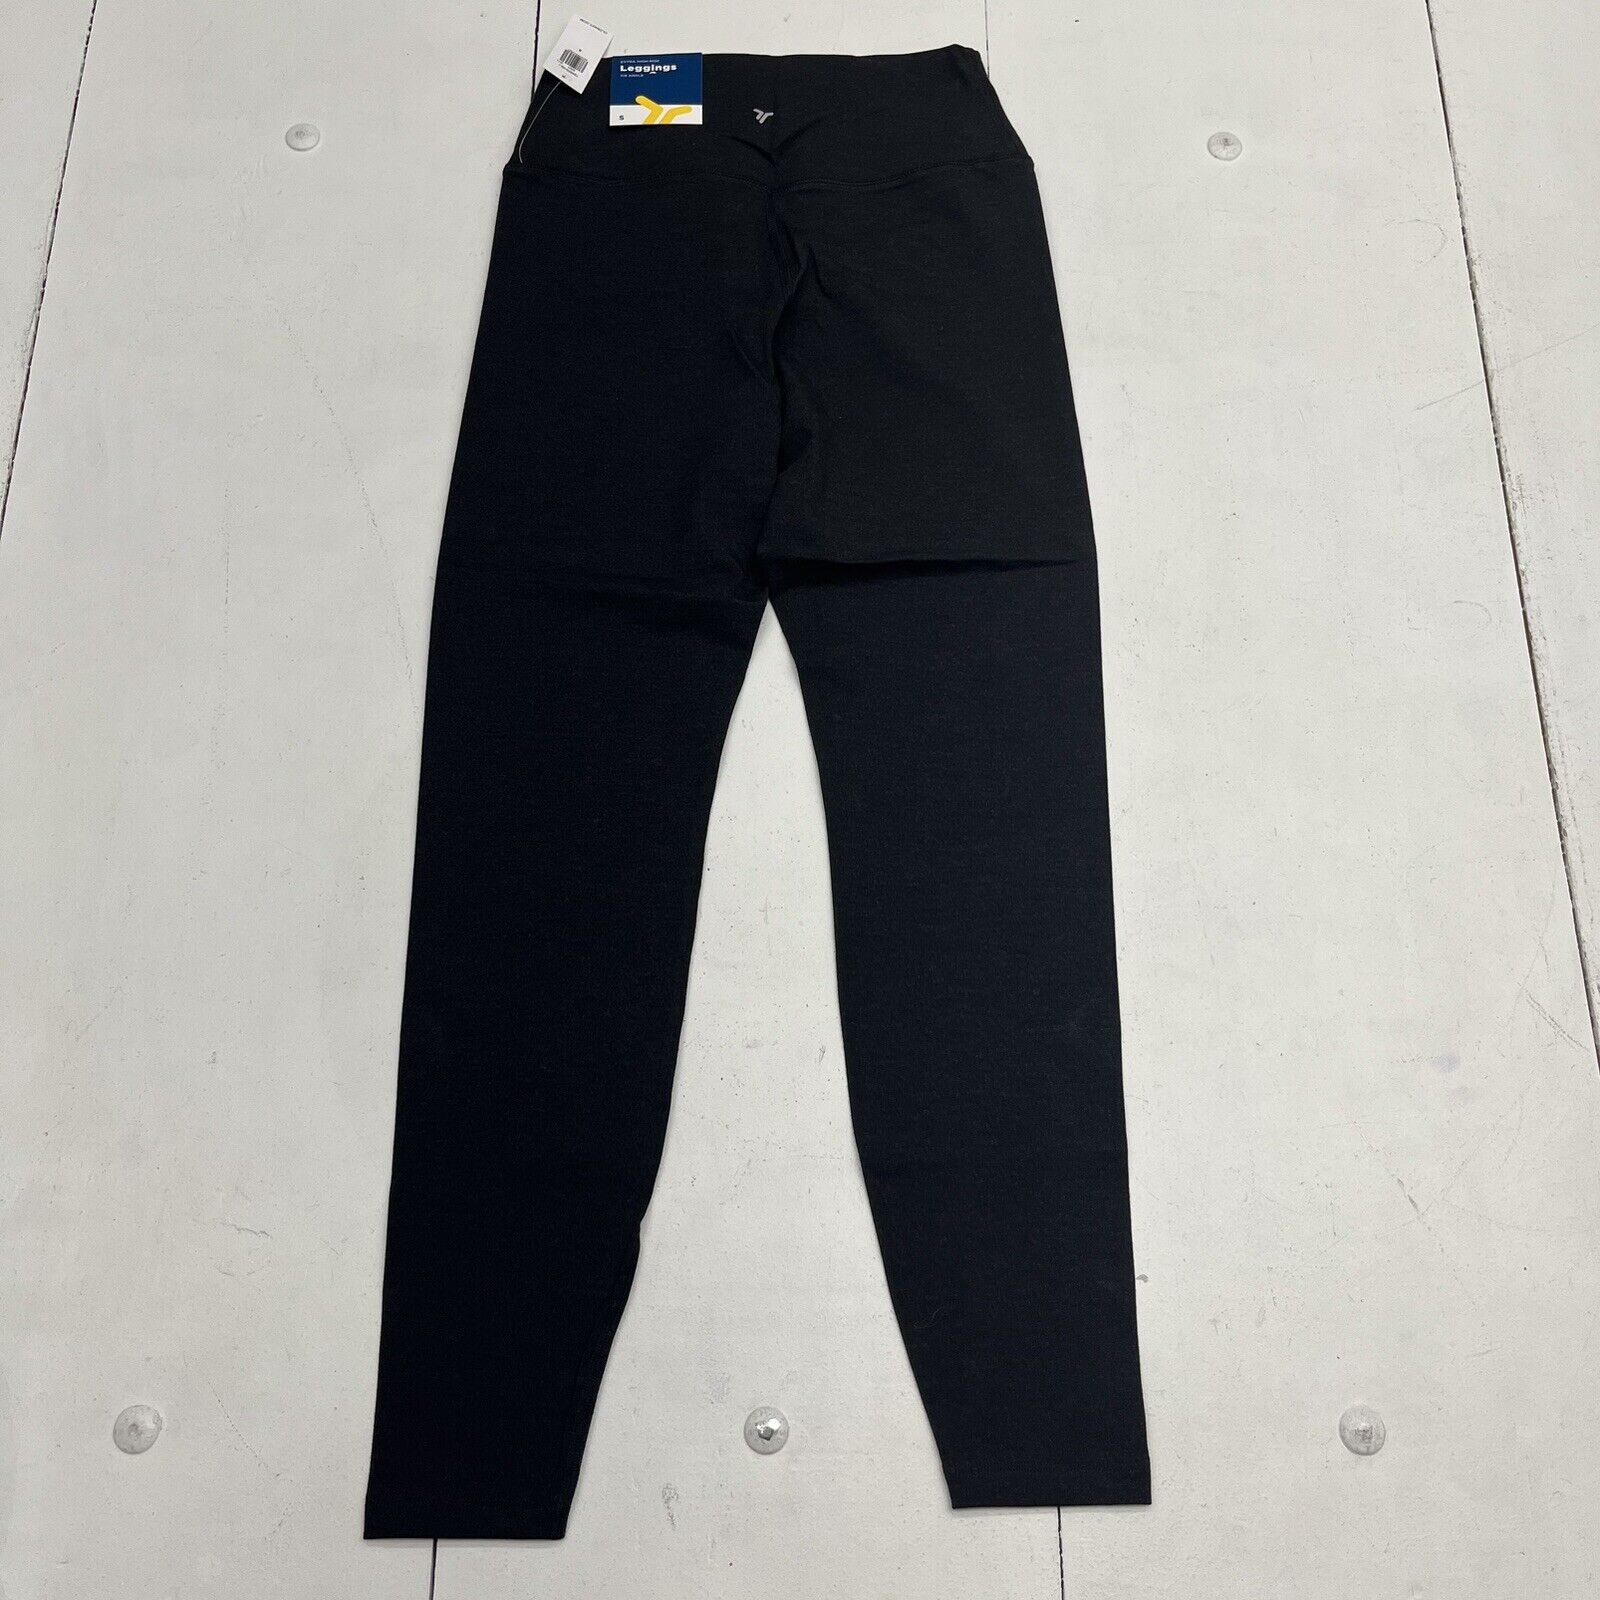 Old Navy Carbon Extra High-Waisted PowerChill Leggings Women's